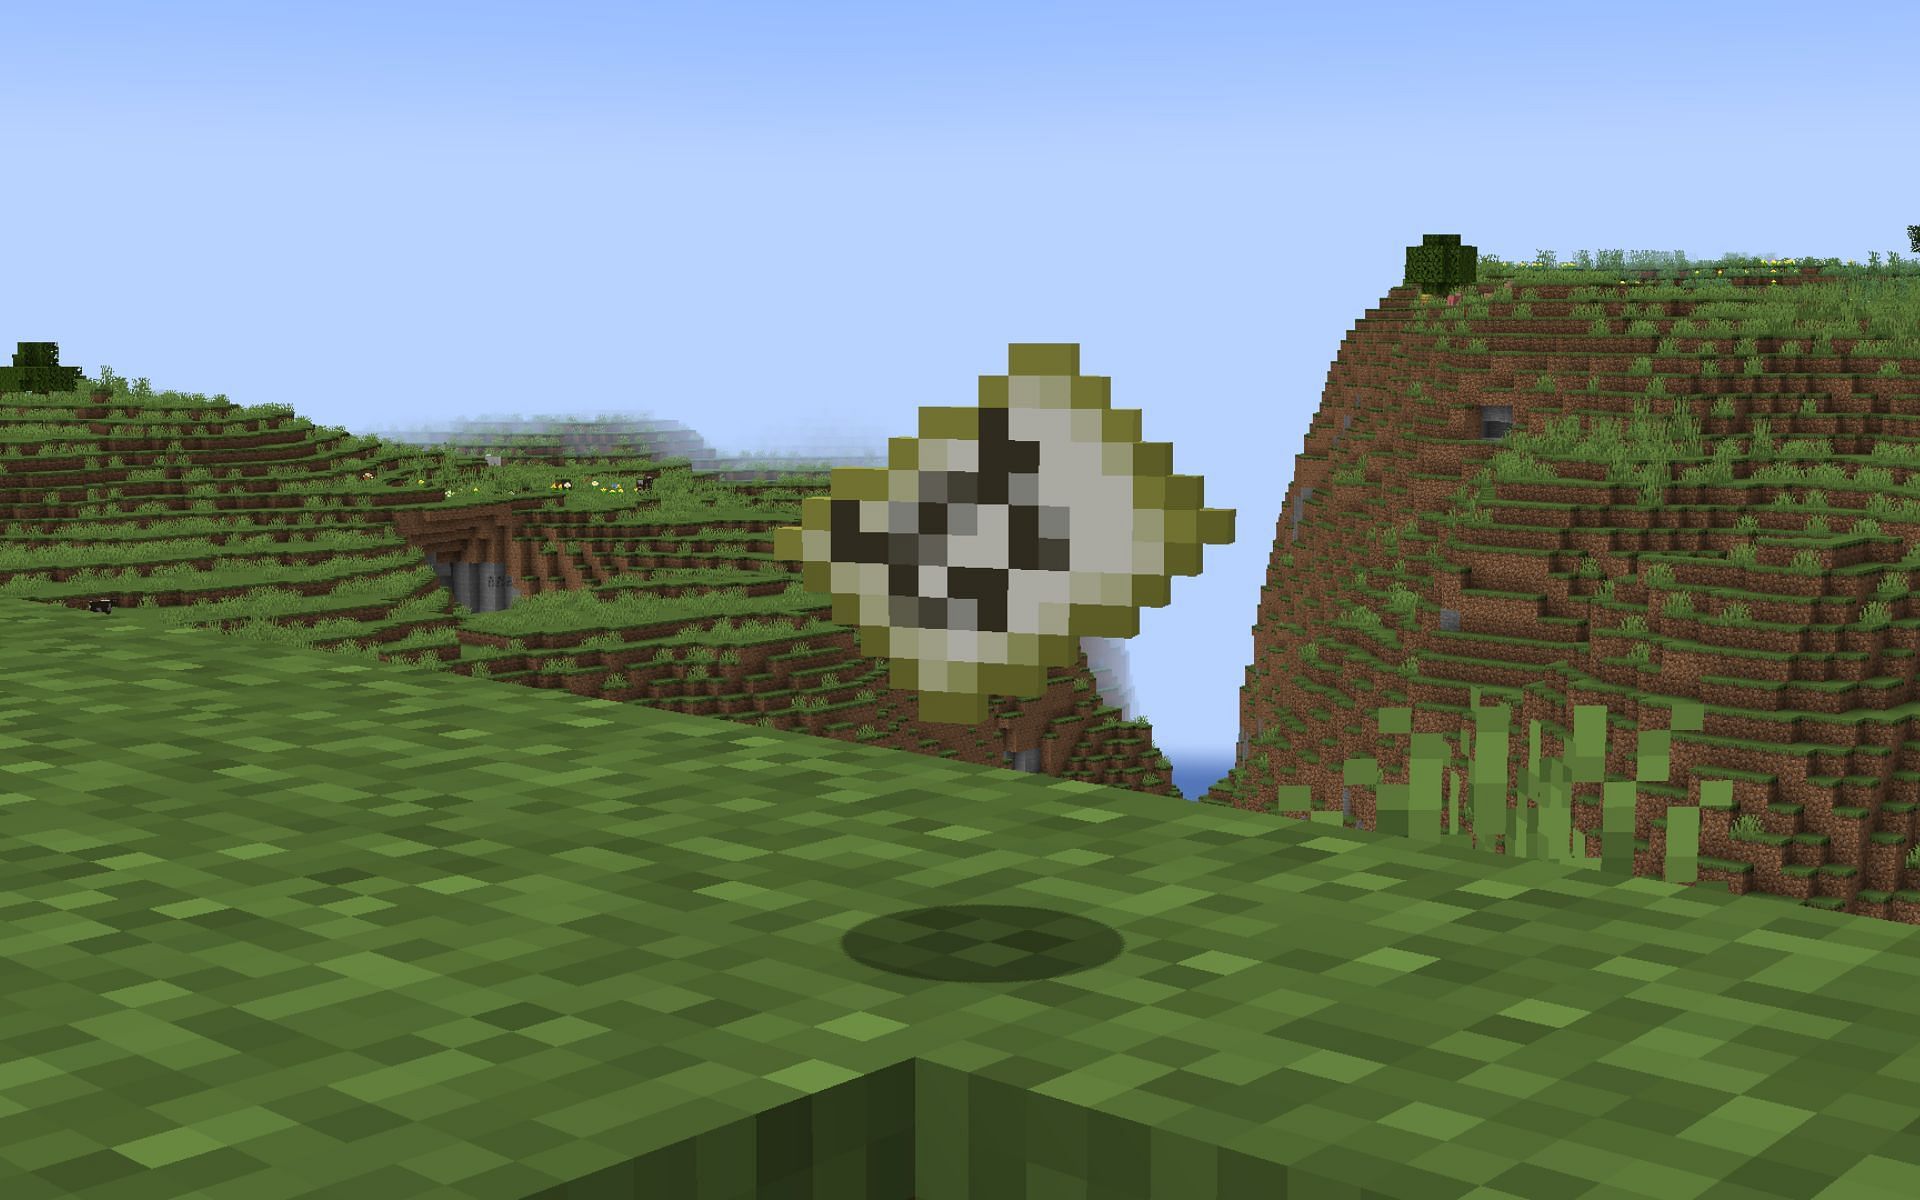 Expanded maps can show more of the area (Image via Minecraft)